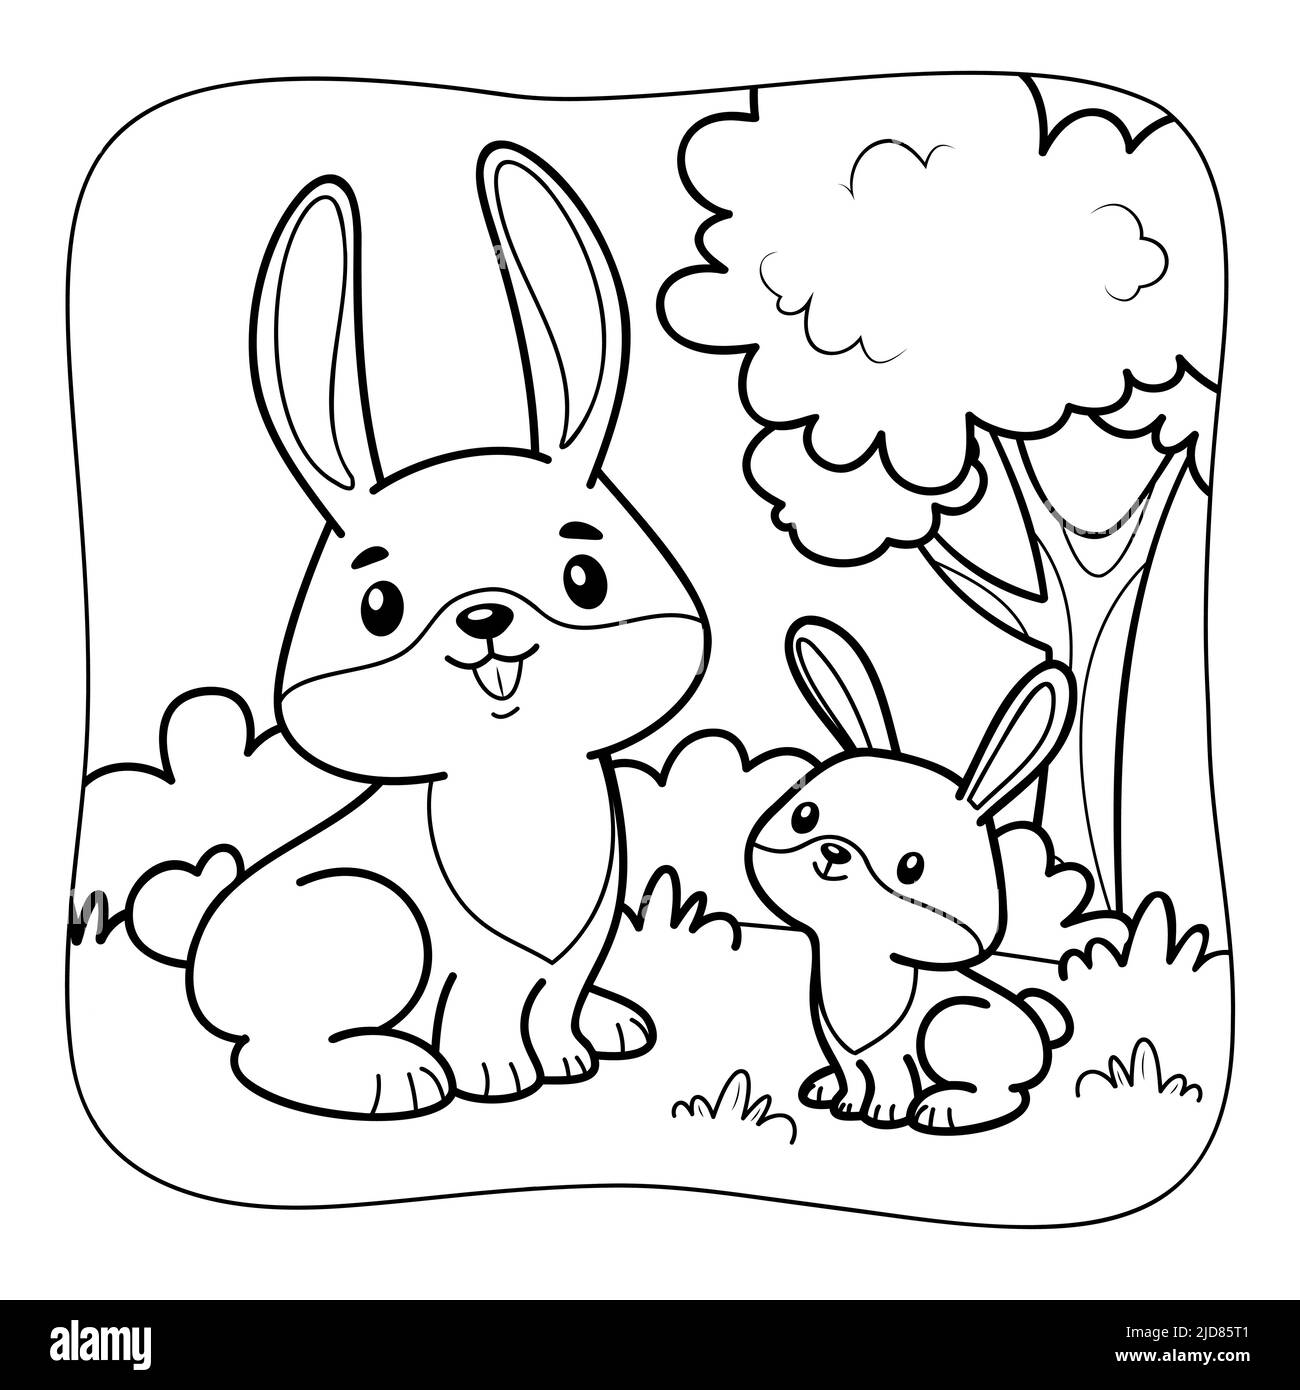 Rabbit black and white. Coloring book or Coloring page for kids. Nature background vector illustration Stock Vector